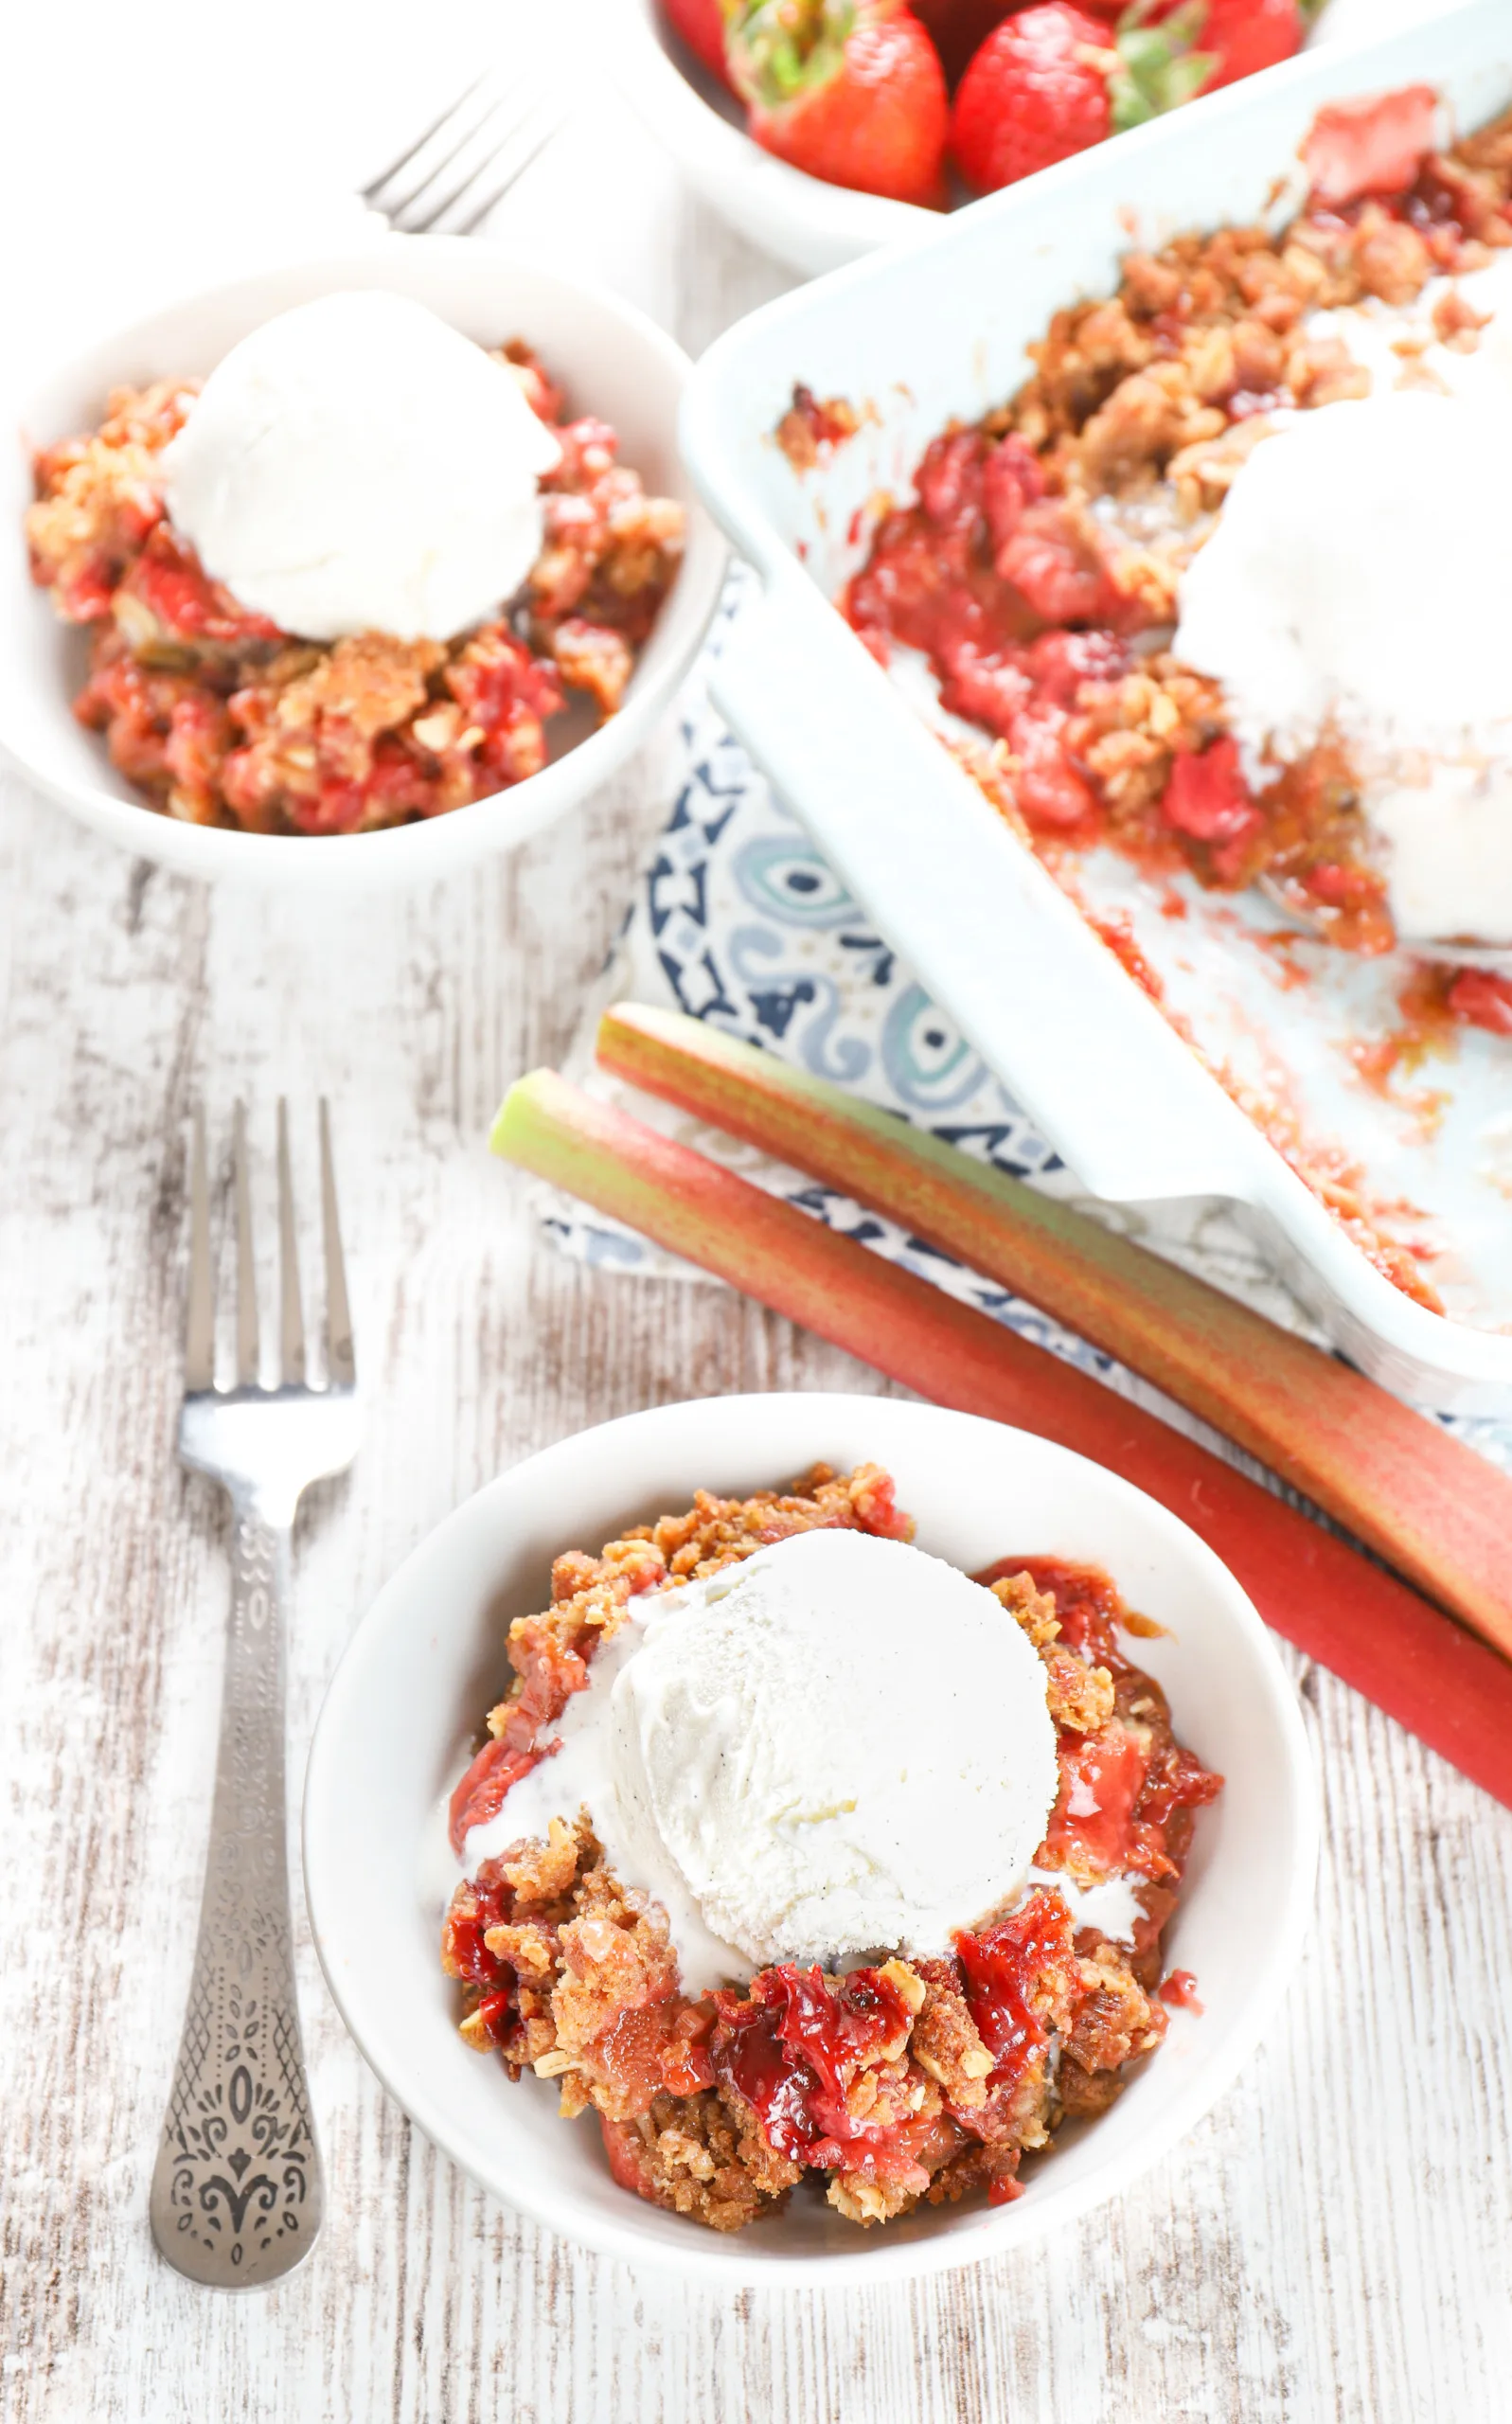 Overhead view of two small white bowls filled with strawberry rhubarb crisp and topped with a scoop of vanilla ice cream.